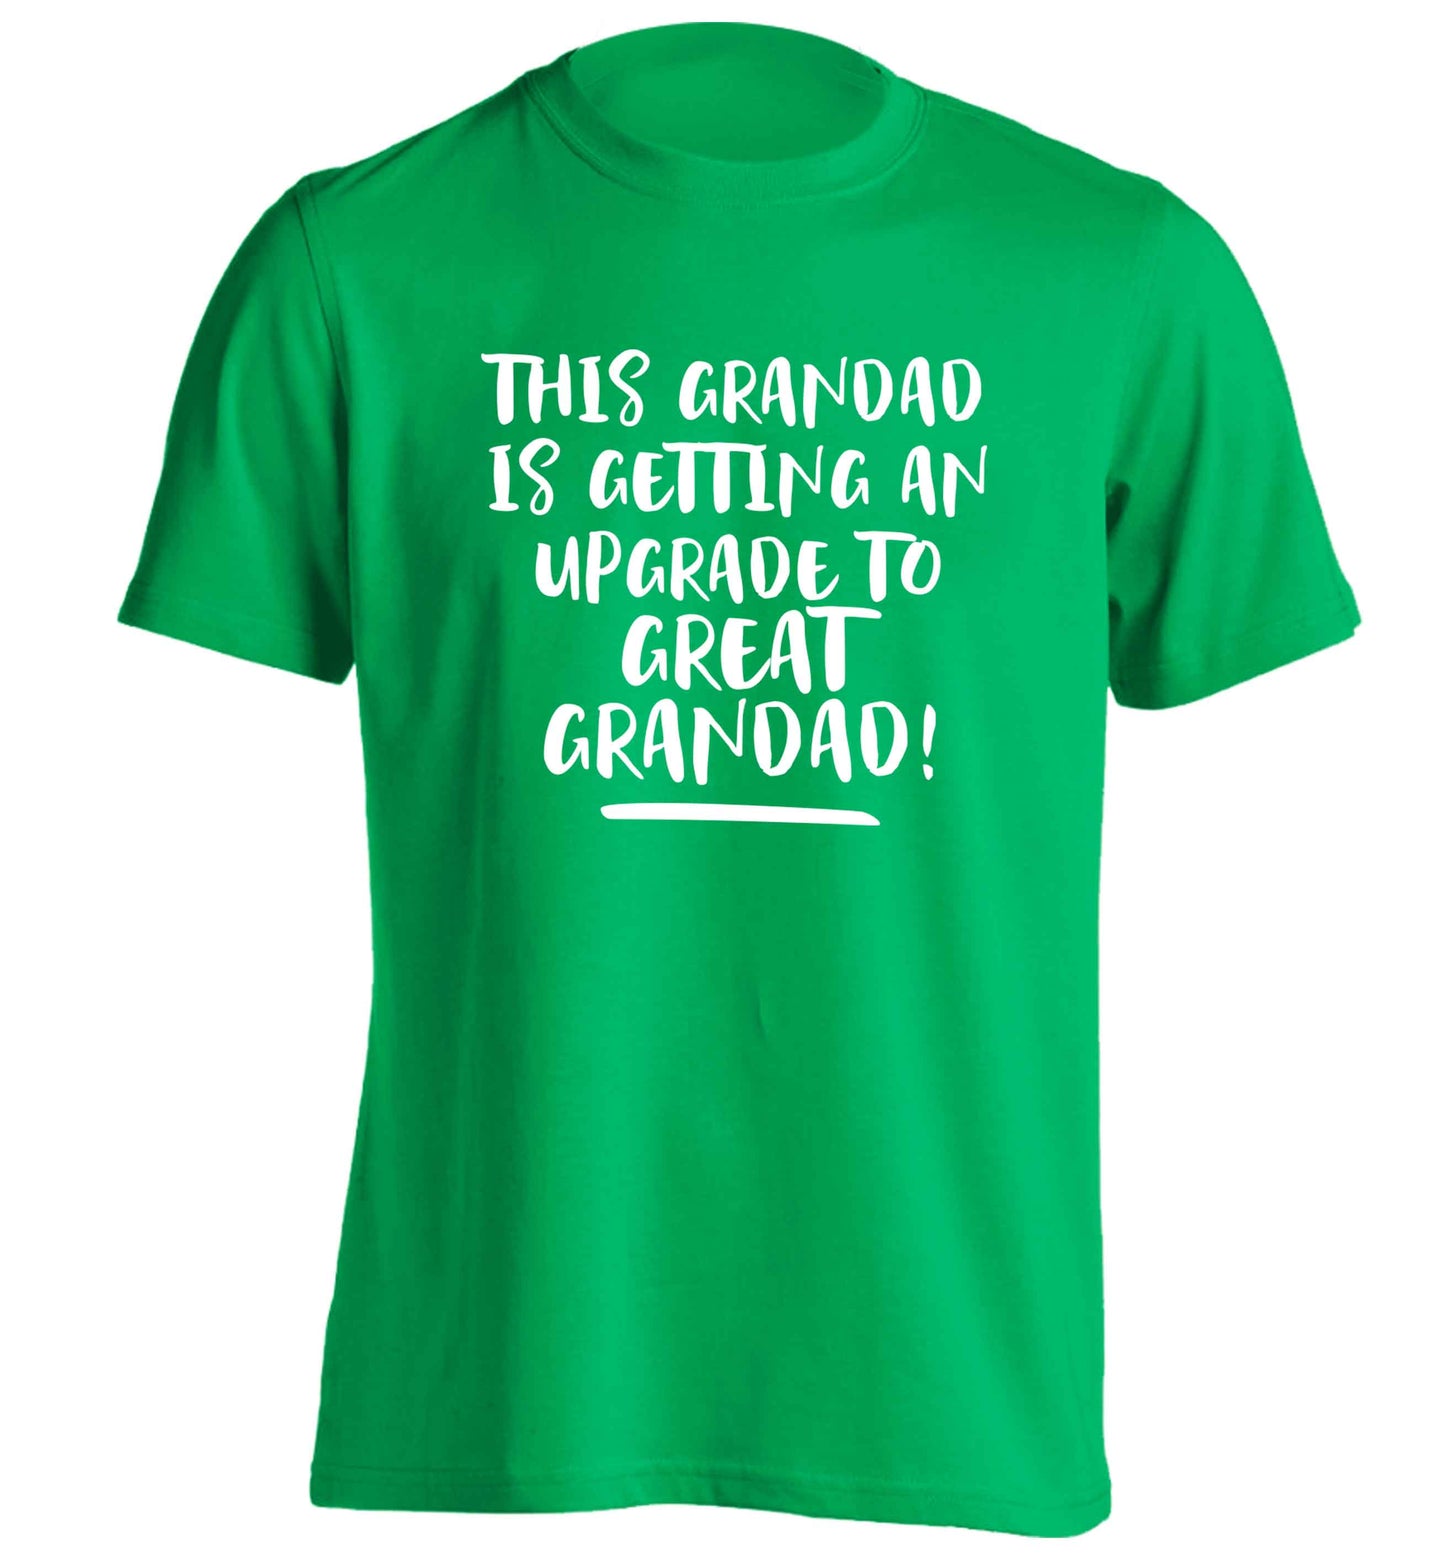 This grandad is getting an upgrade to great grandad! adults unisex green Tshirt 2XL